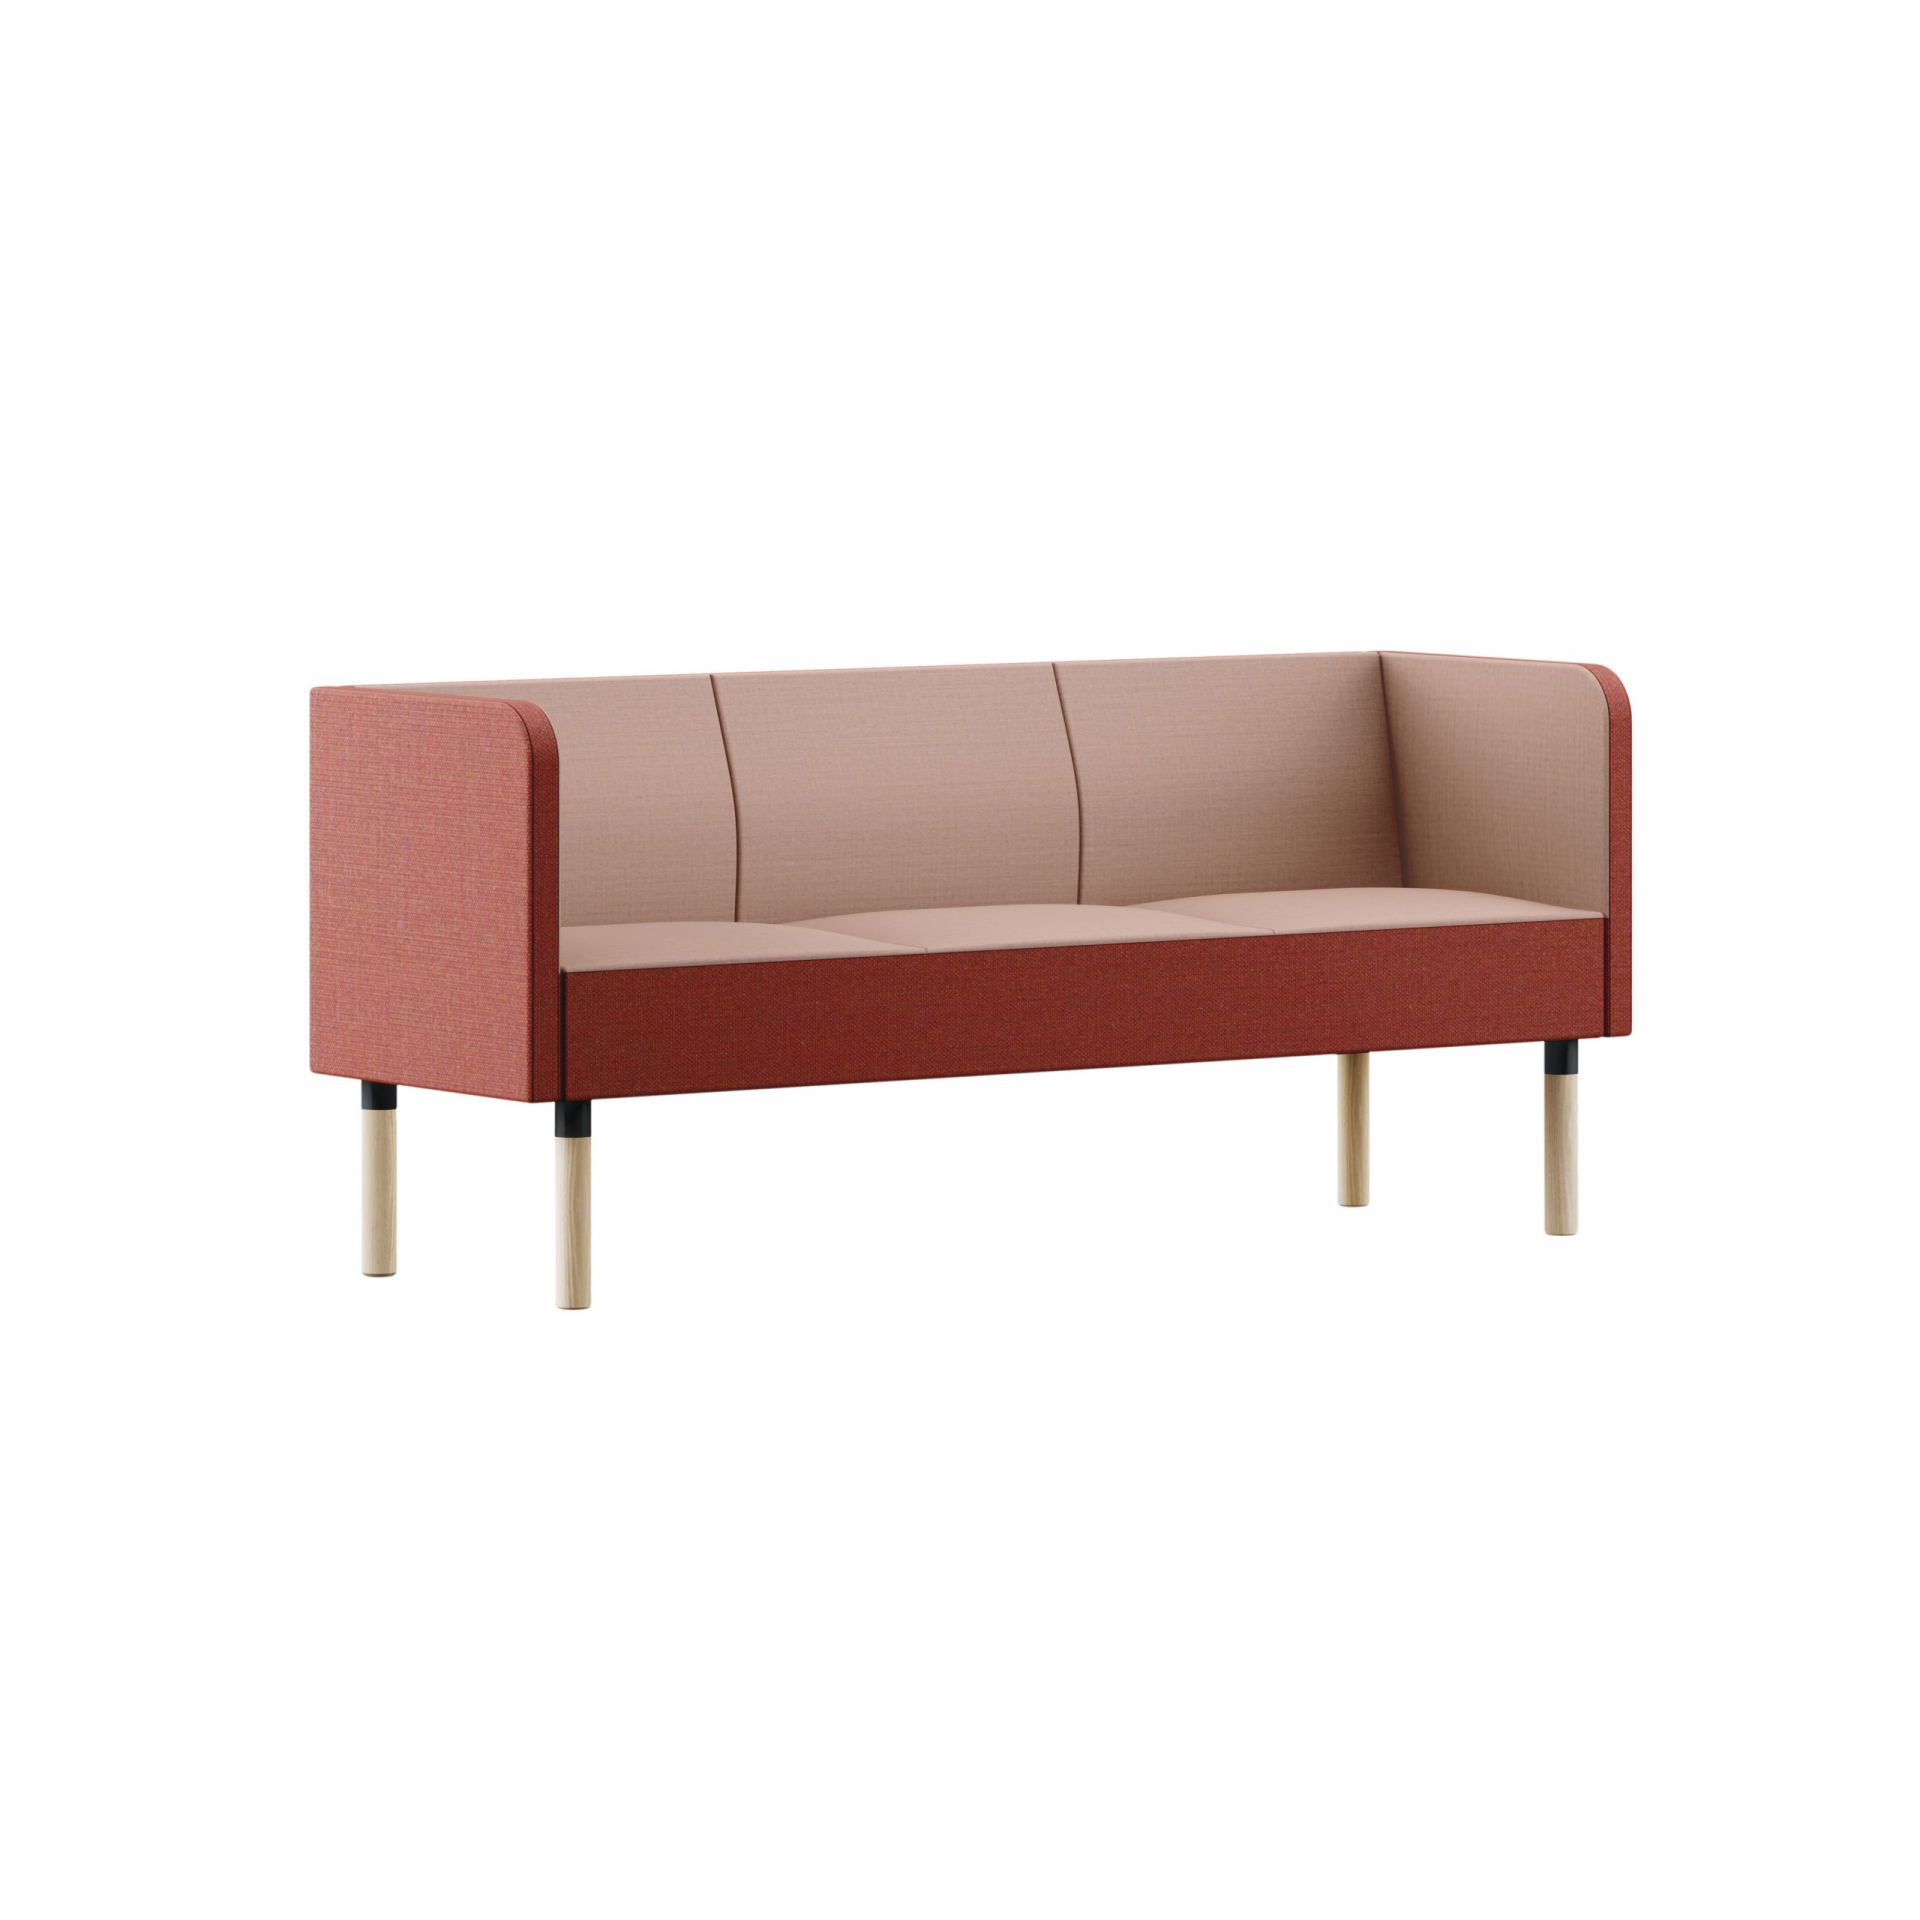 Mingle Sofa with wooden legs